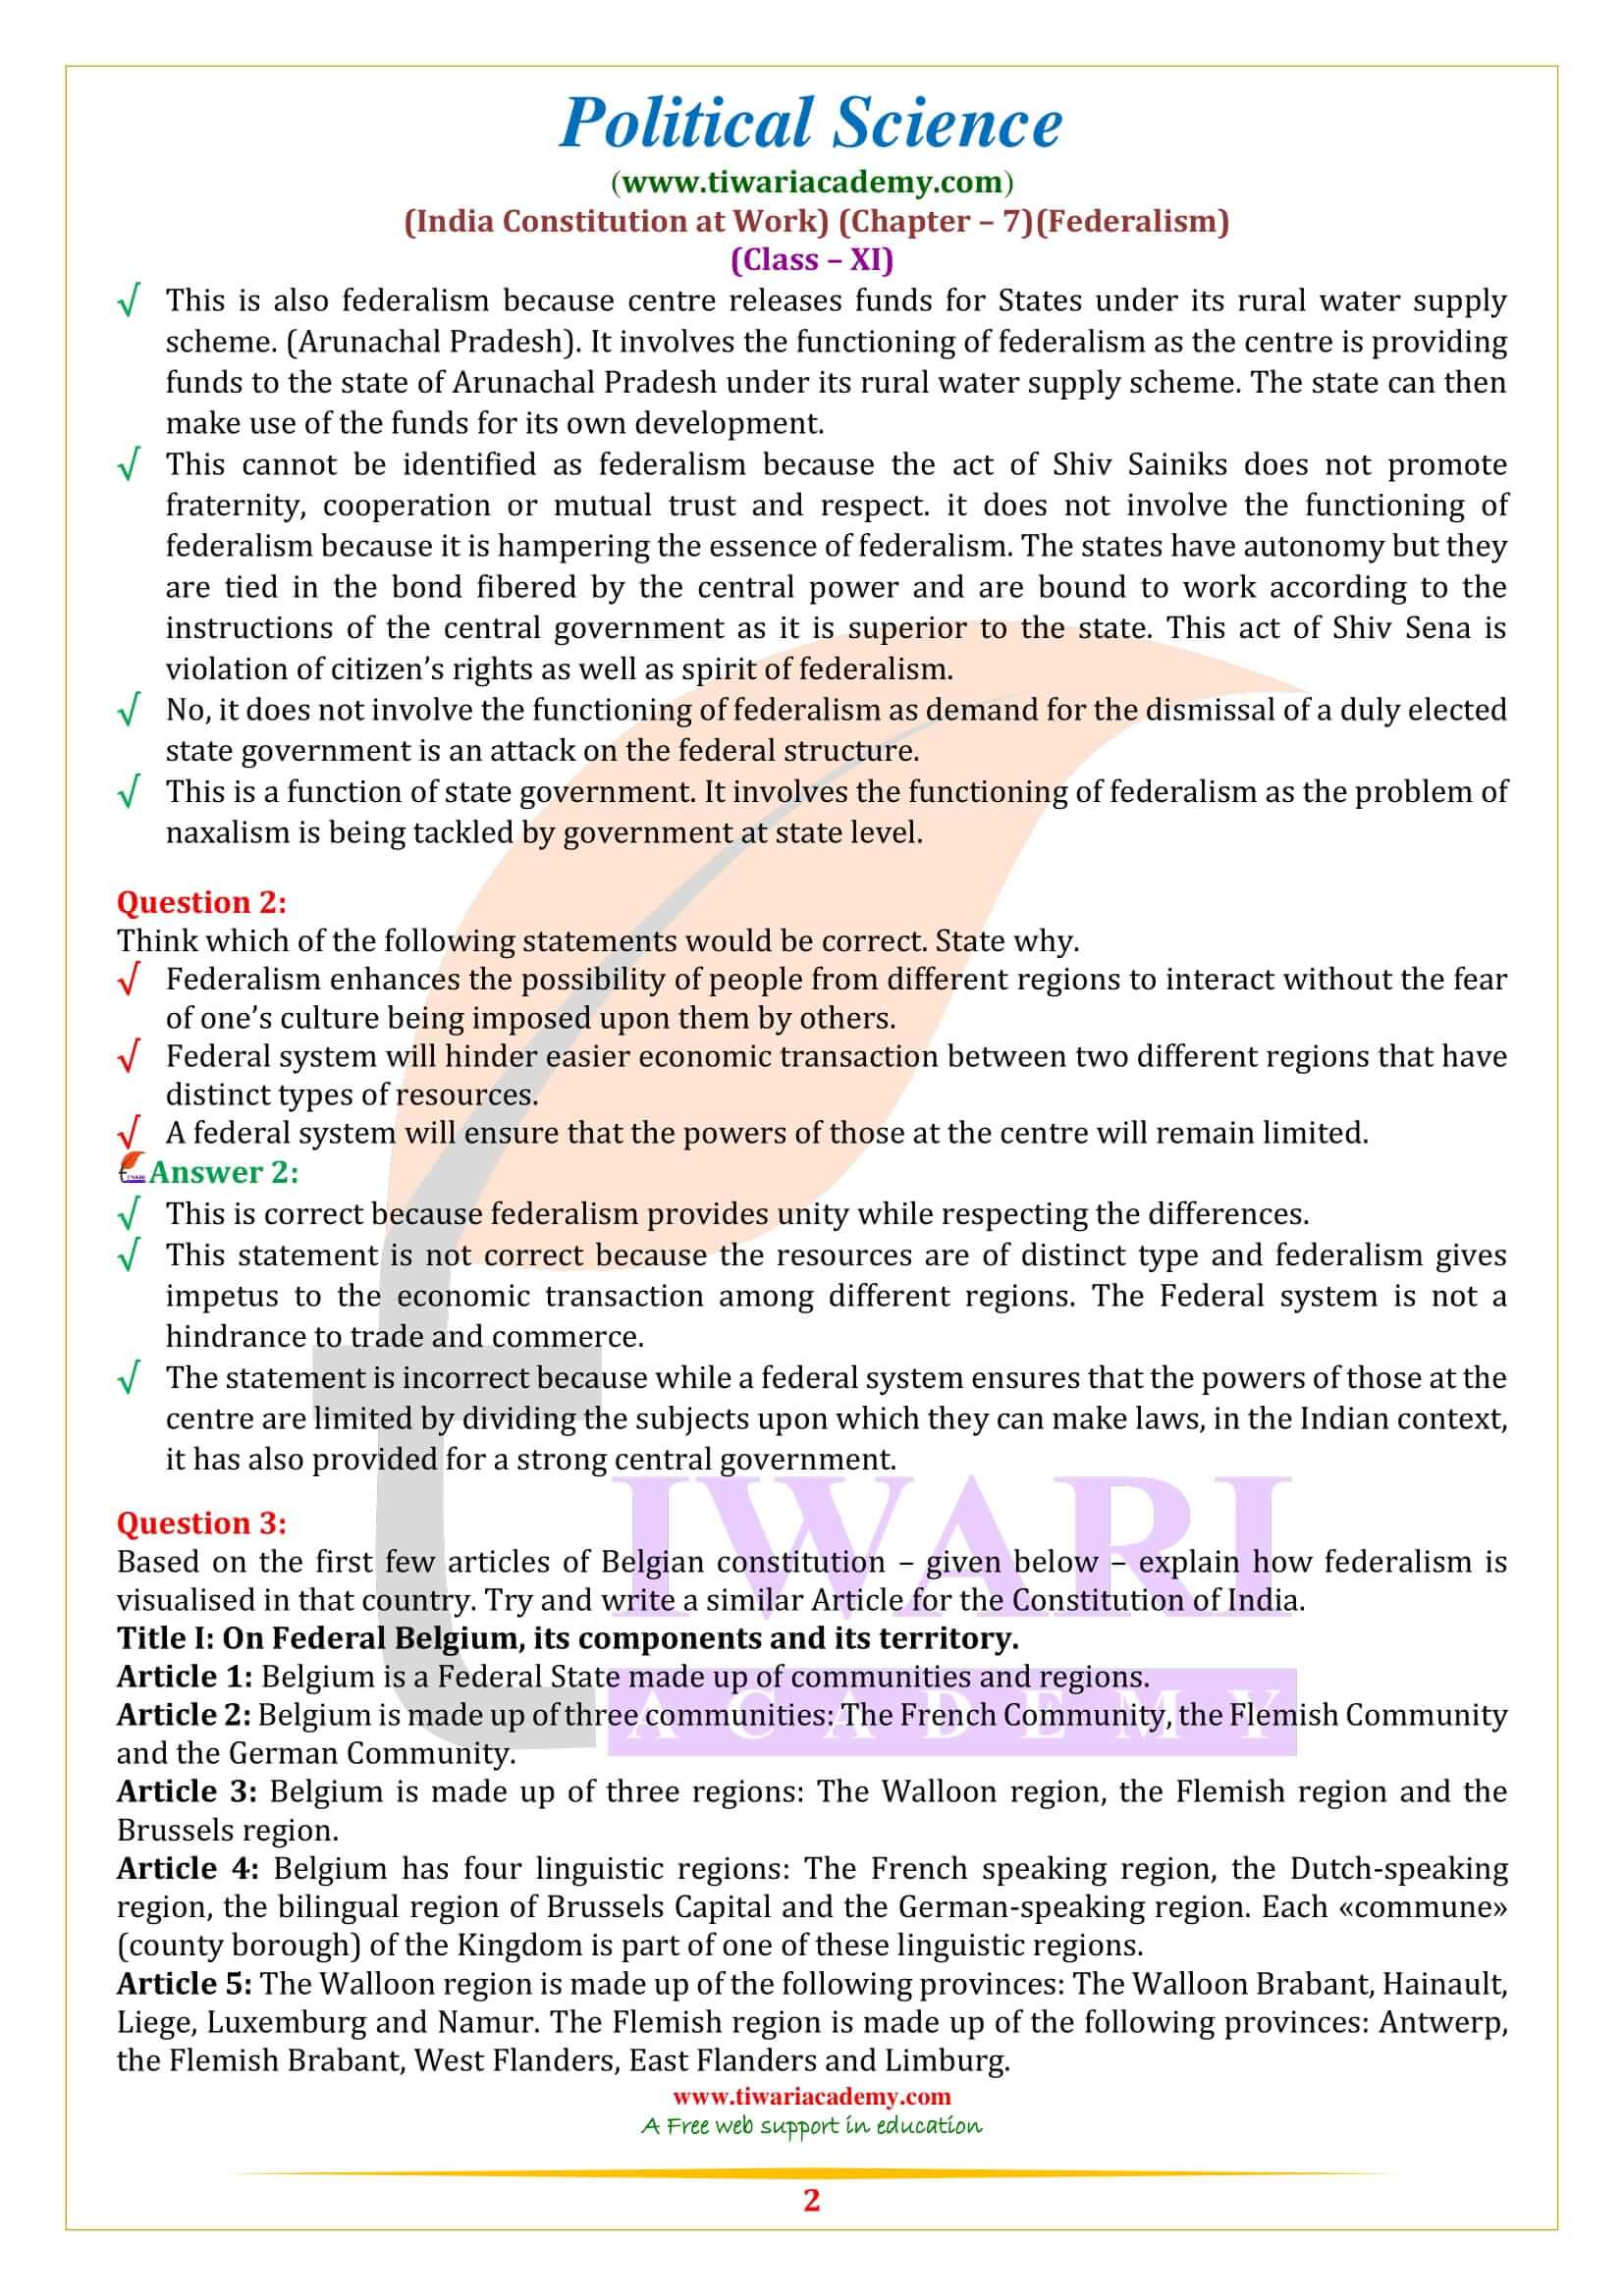 NCERT Solutions for Class 11 Political Science Chapter 7